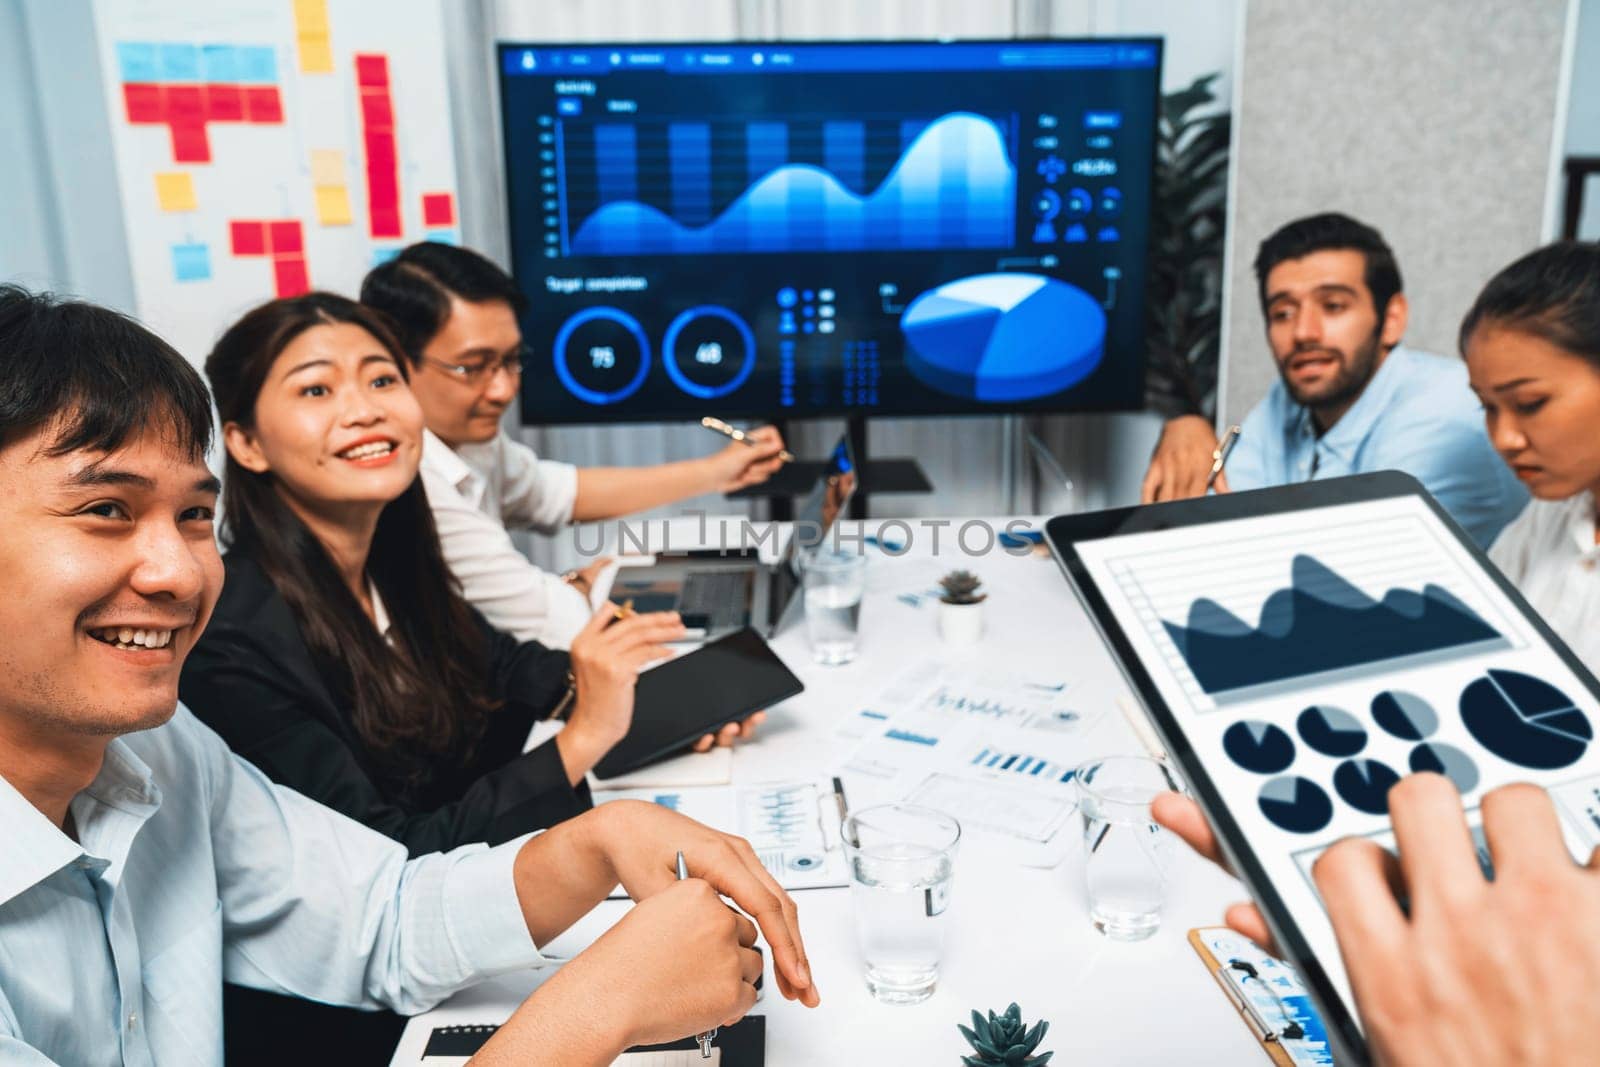 Analyst team uses BI Fintech display tablet to analyze financial data . Business people analyze BI software technology dashboard power for insights power into business marketing planning. Prudent